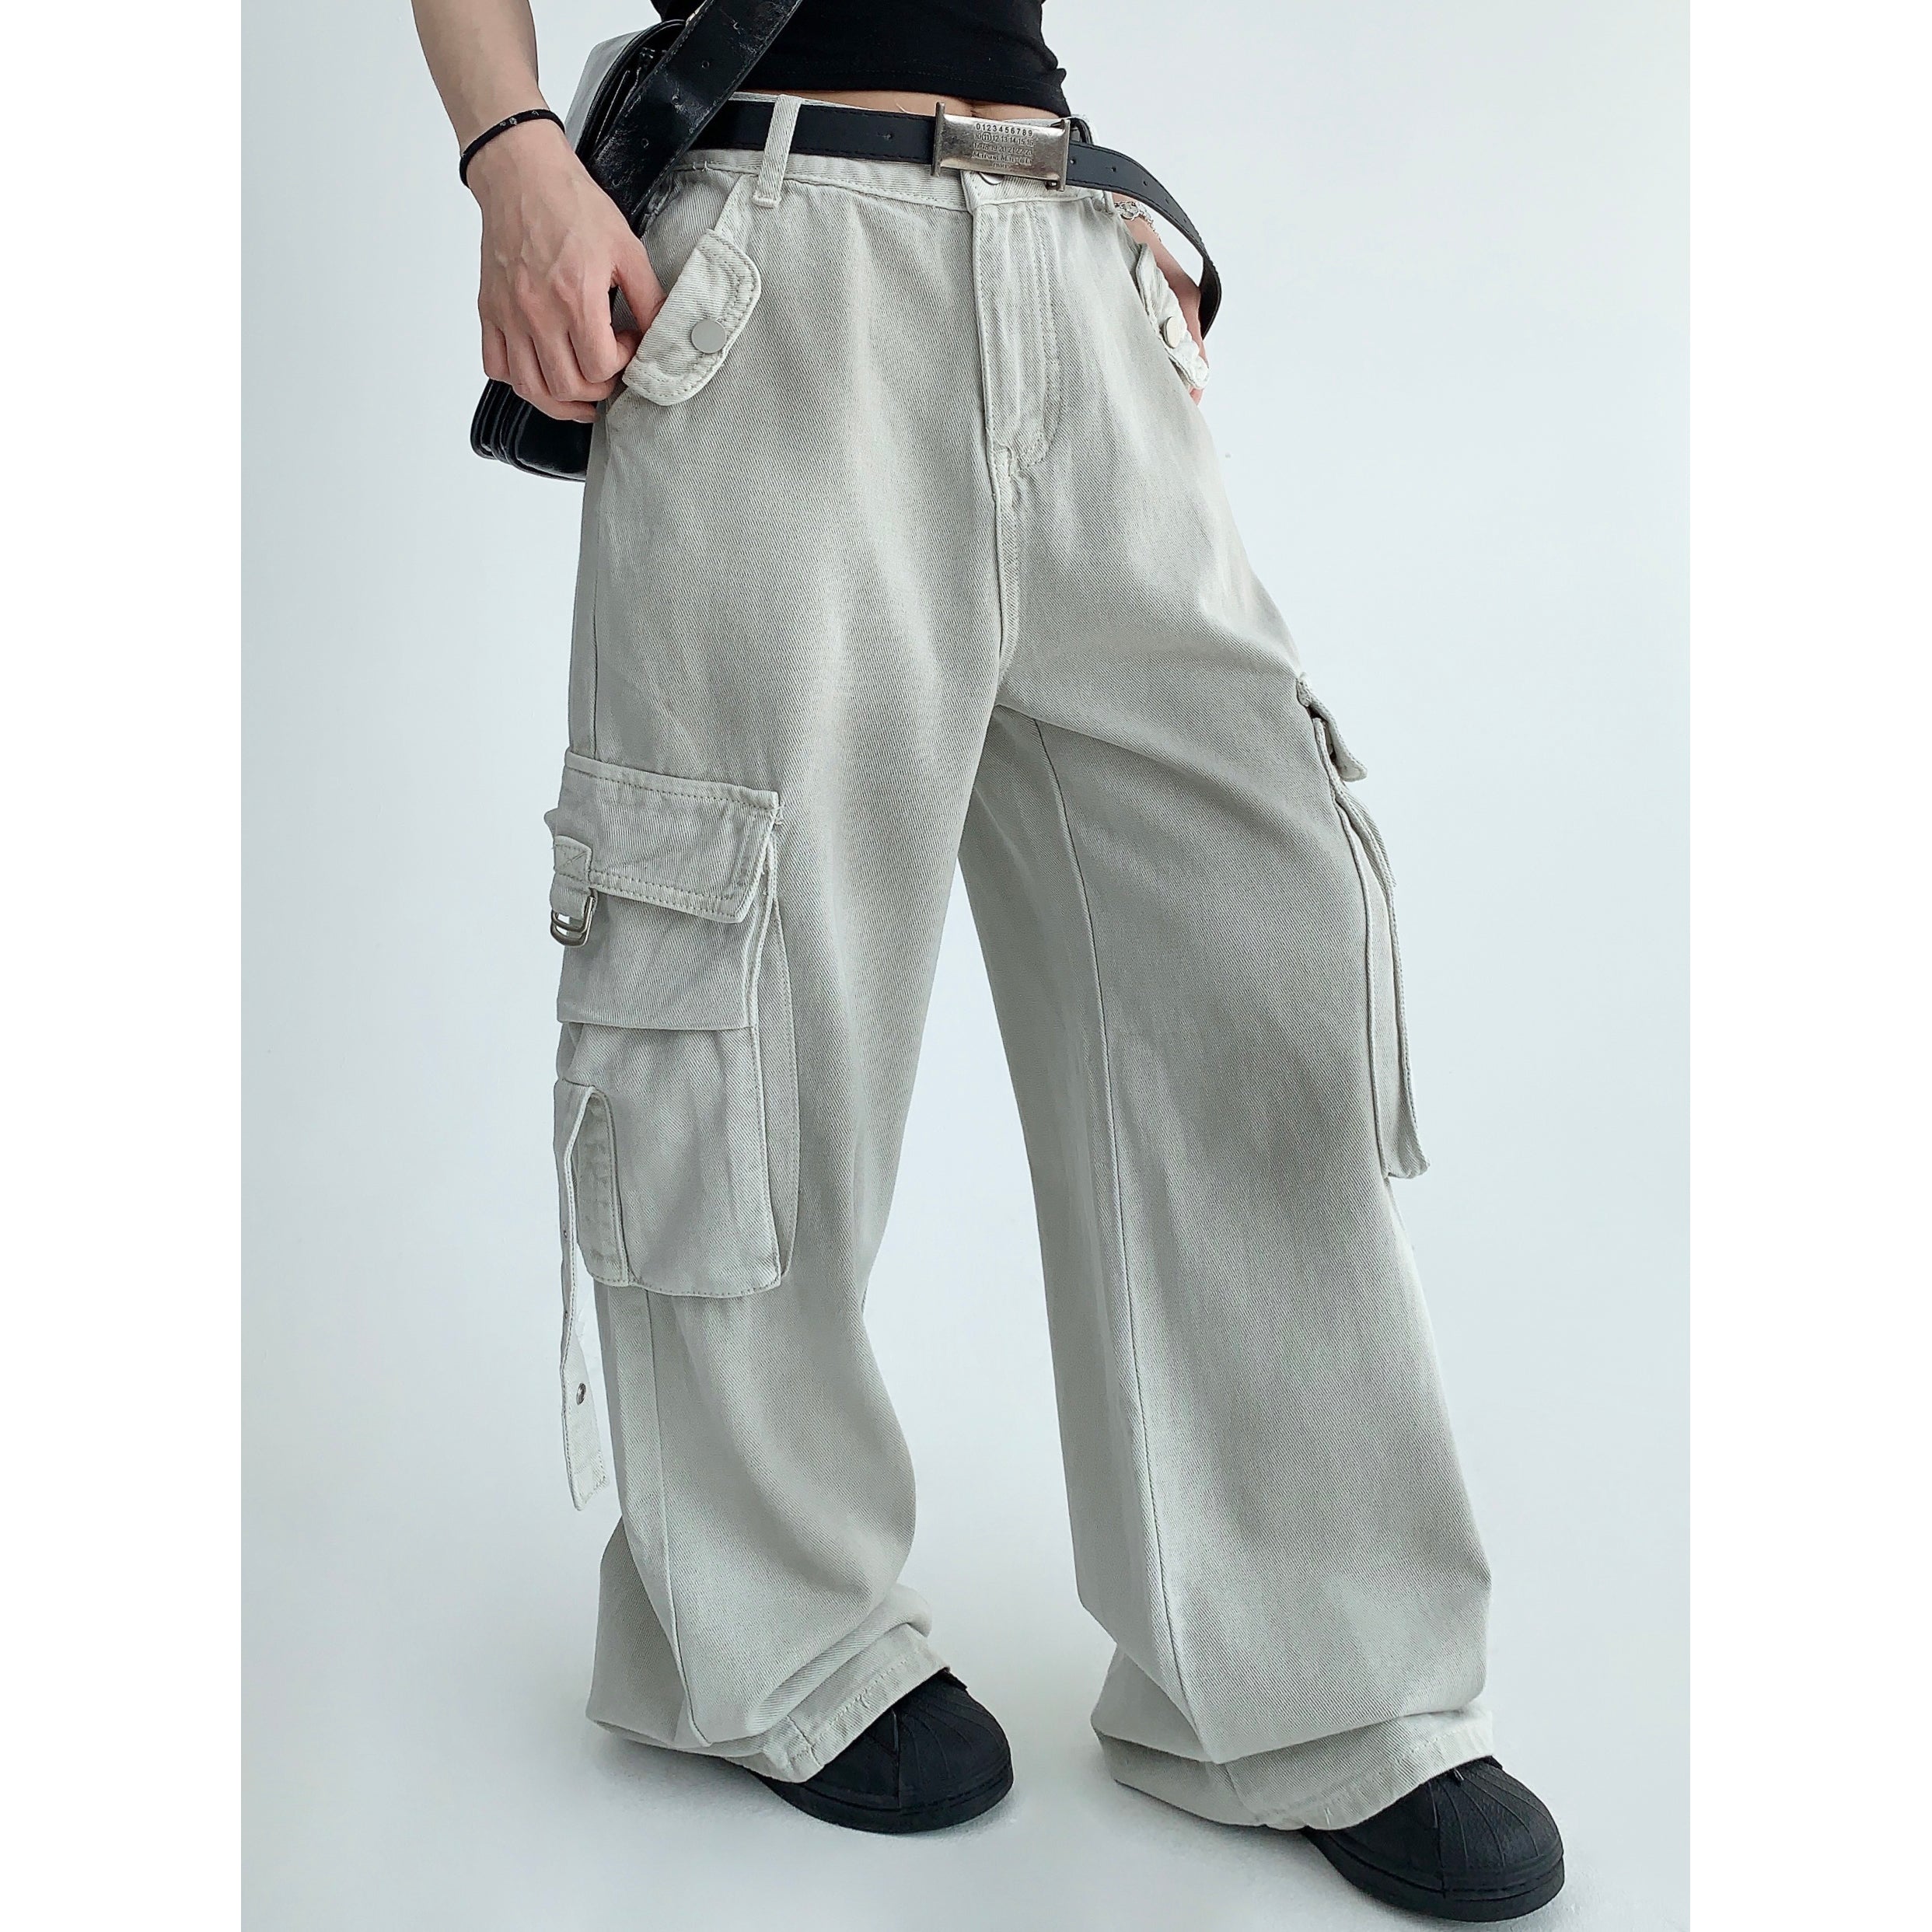 Washed & Distressed Work Cargo Pants MW9053